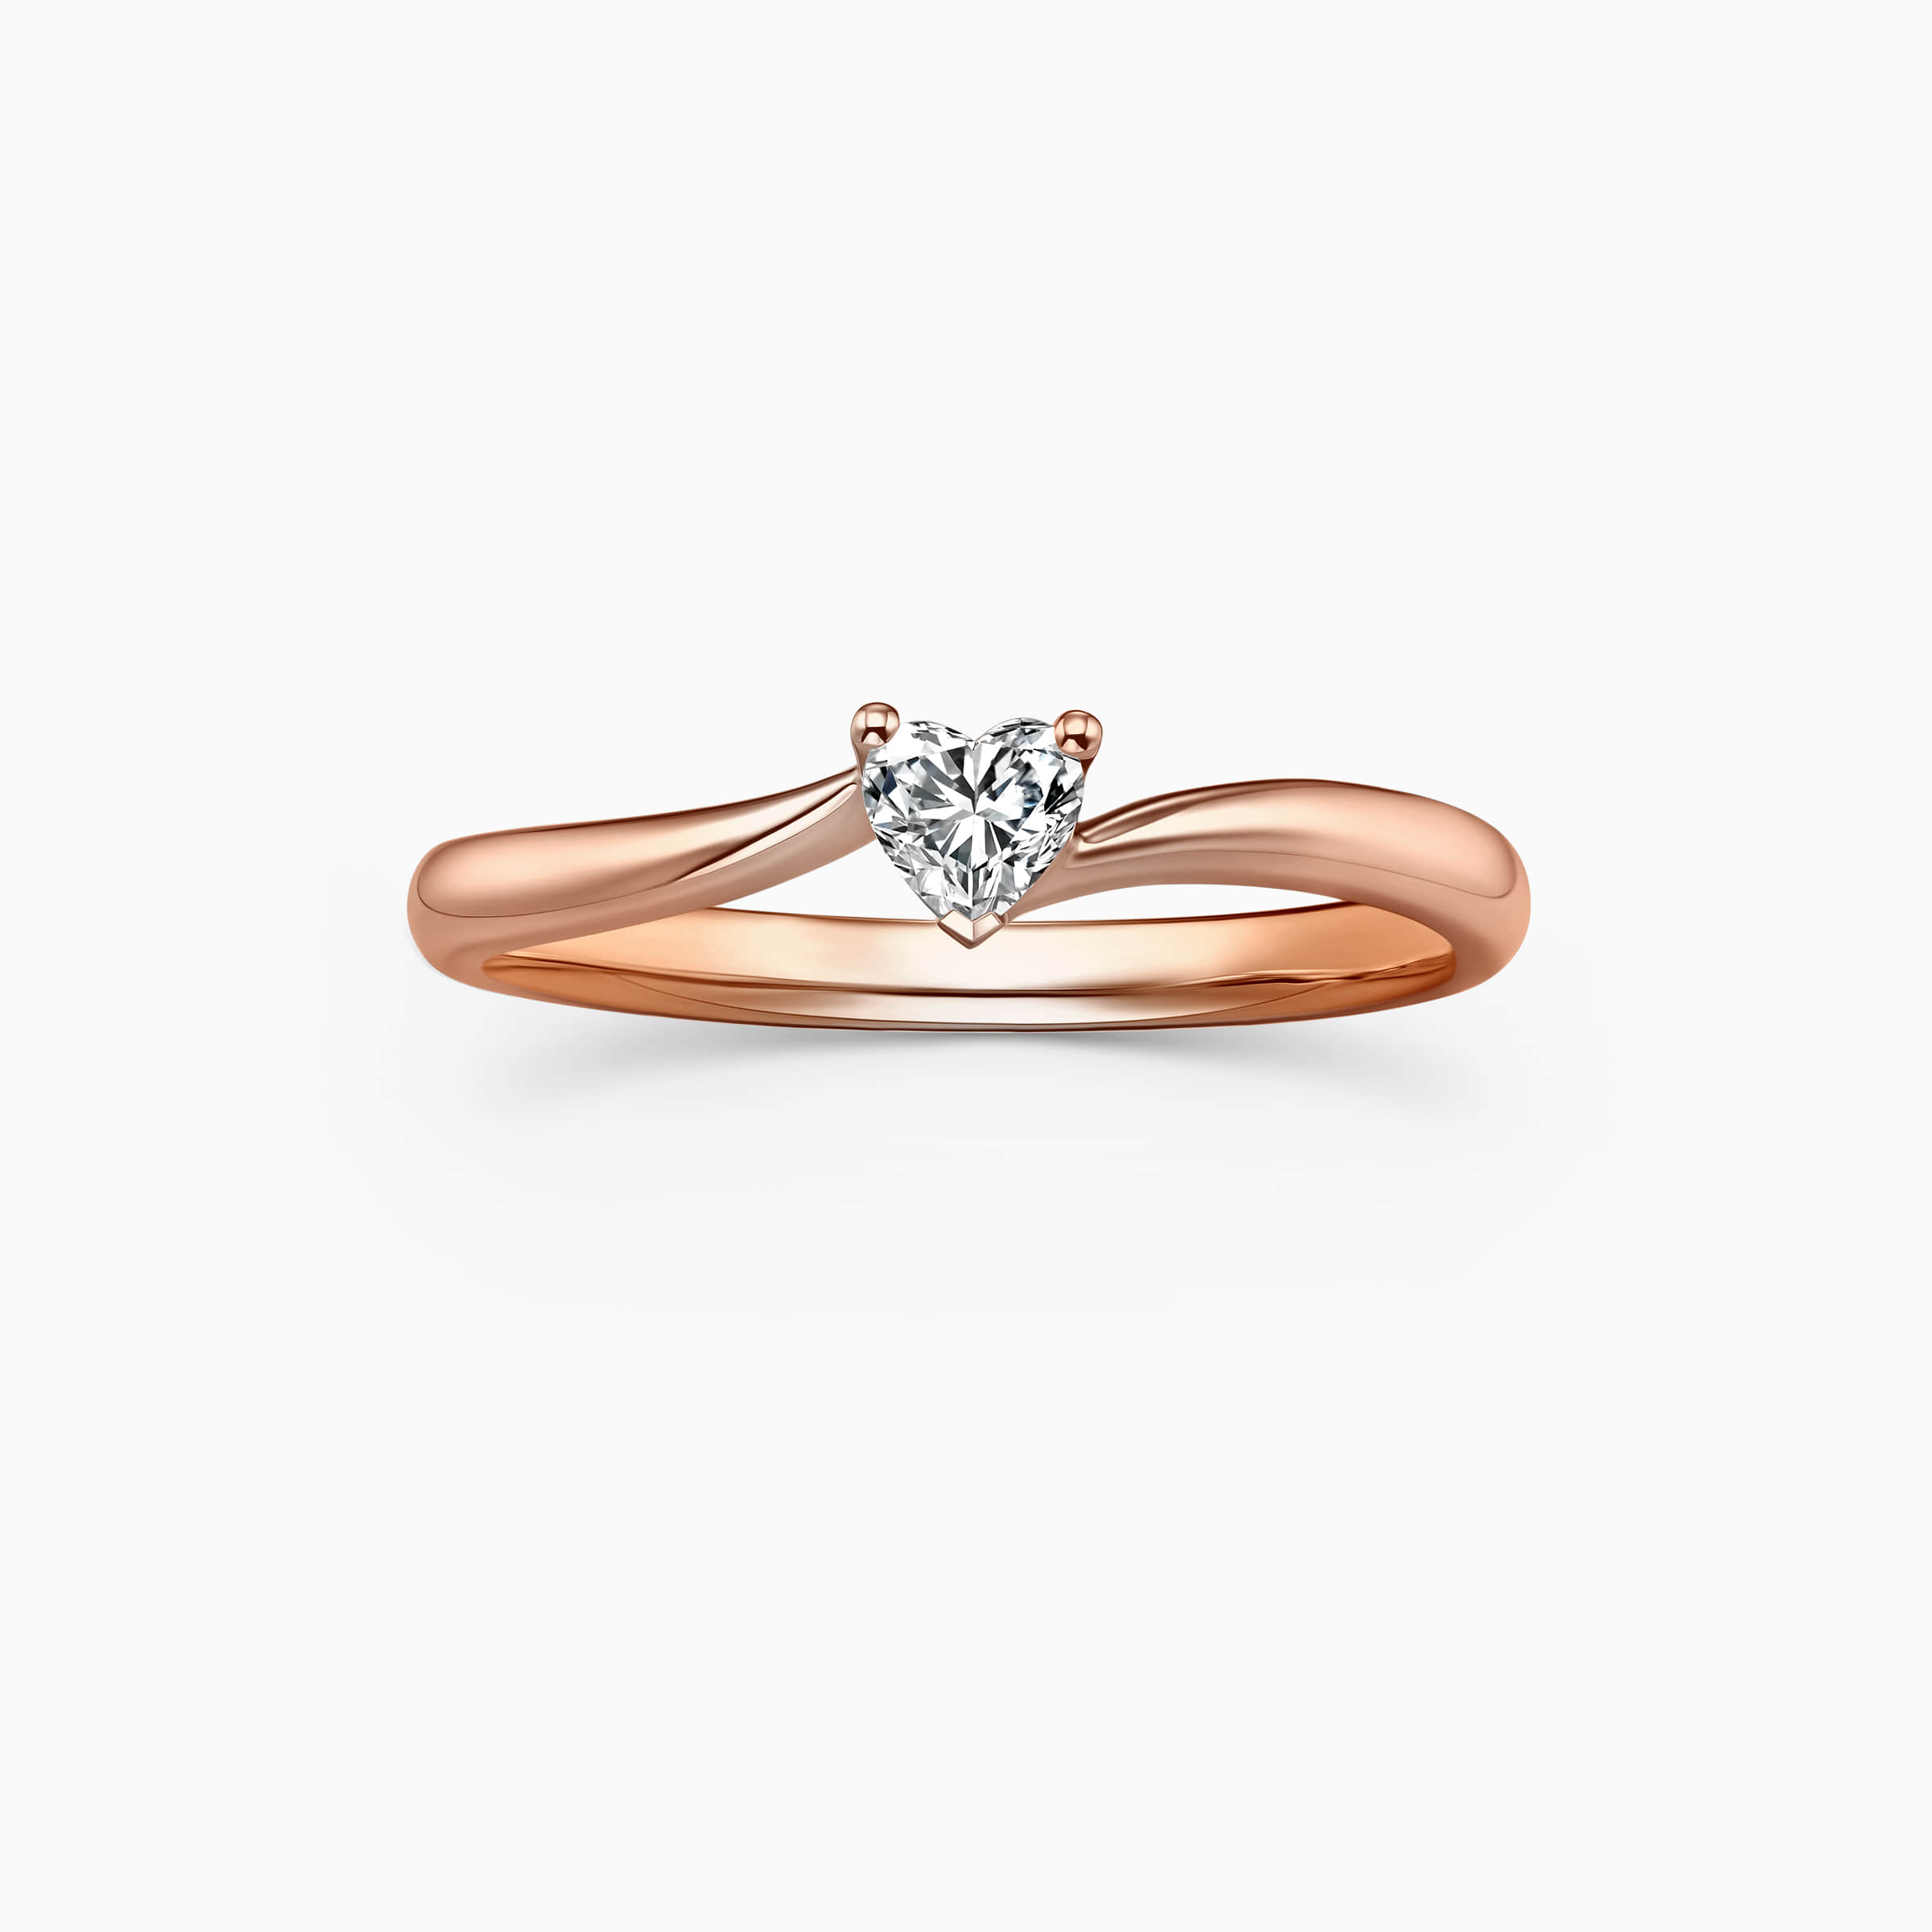 darry ring heart shaped solitaire engagement ring rose gold